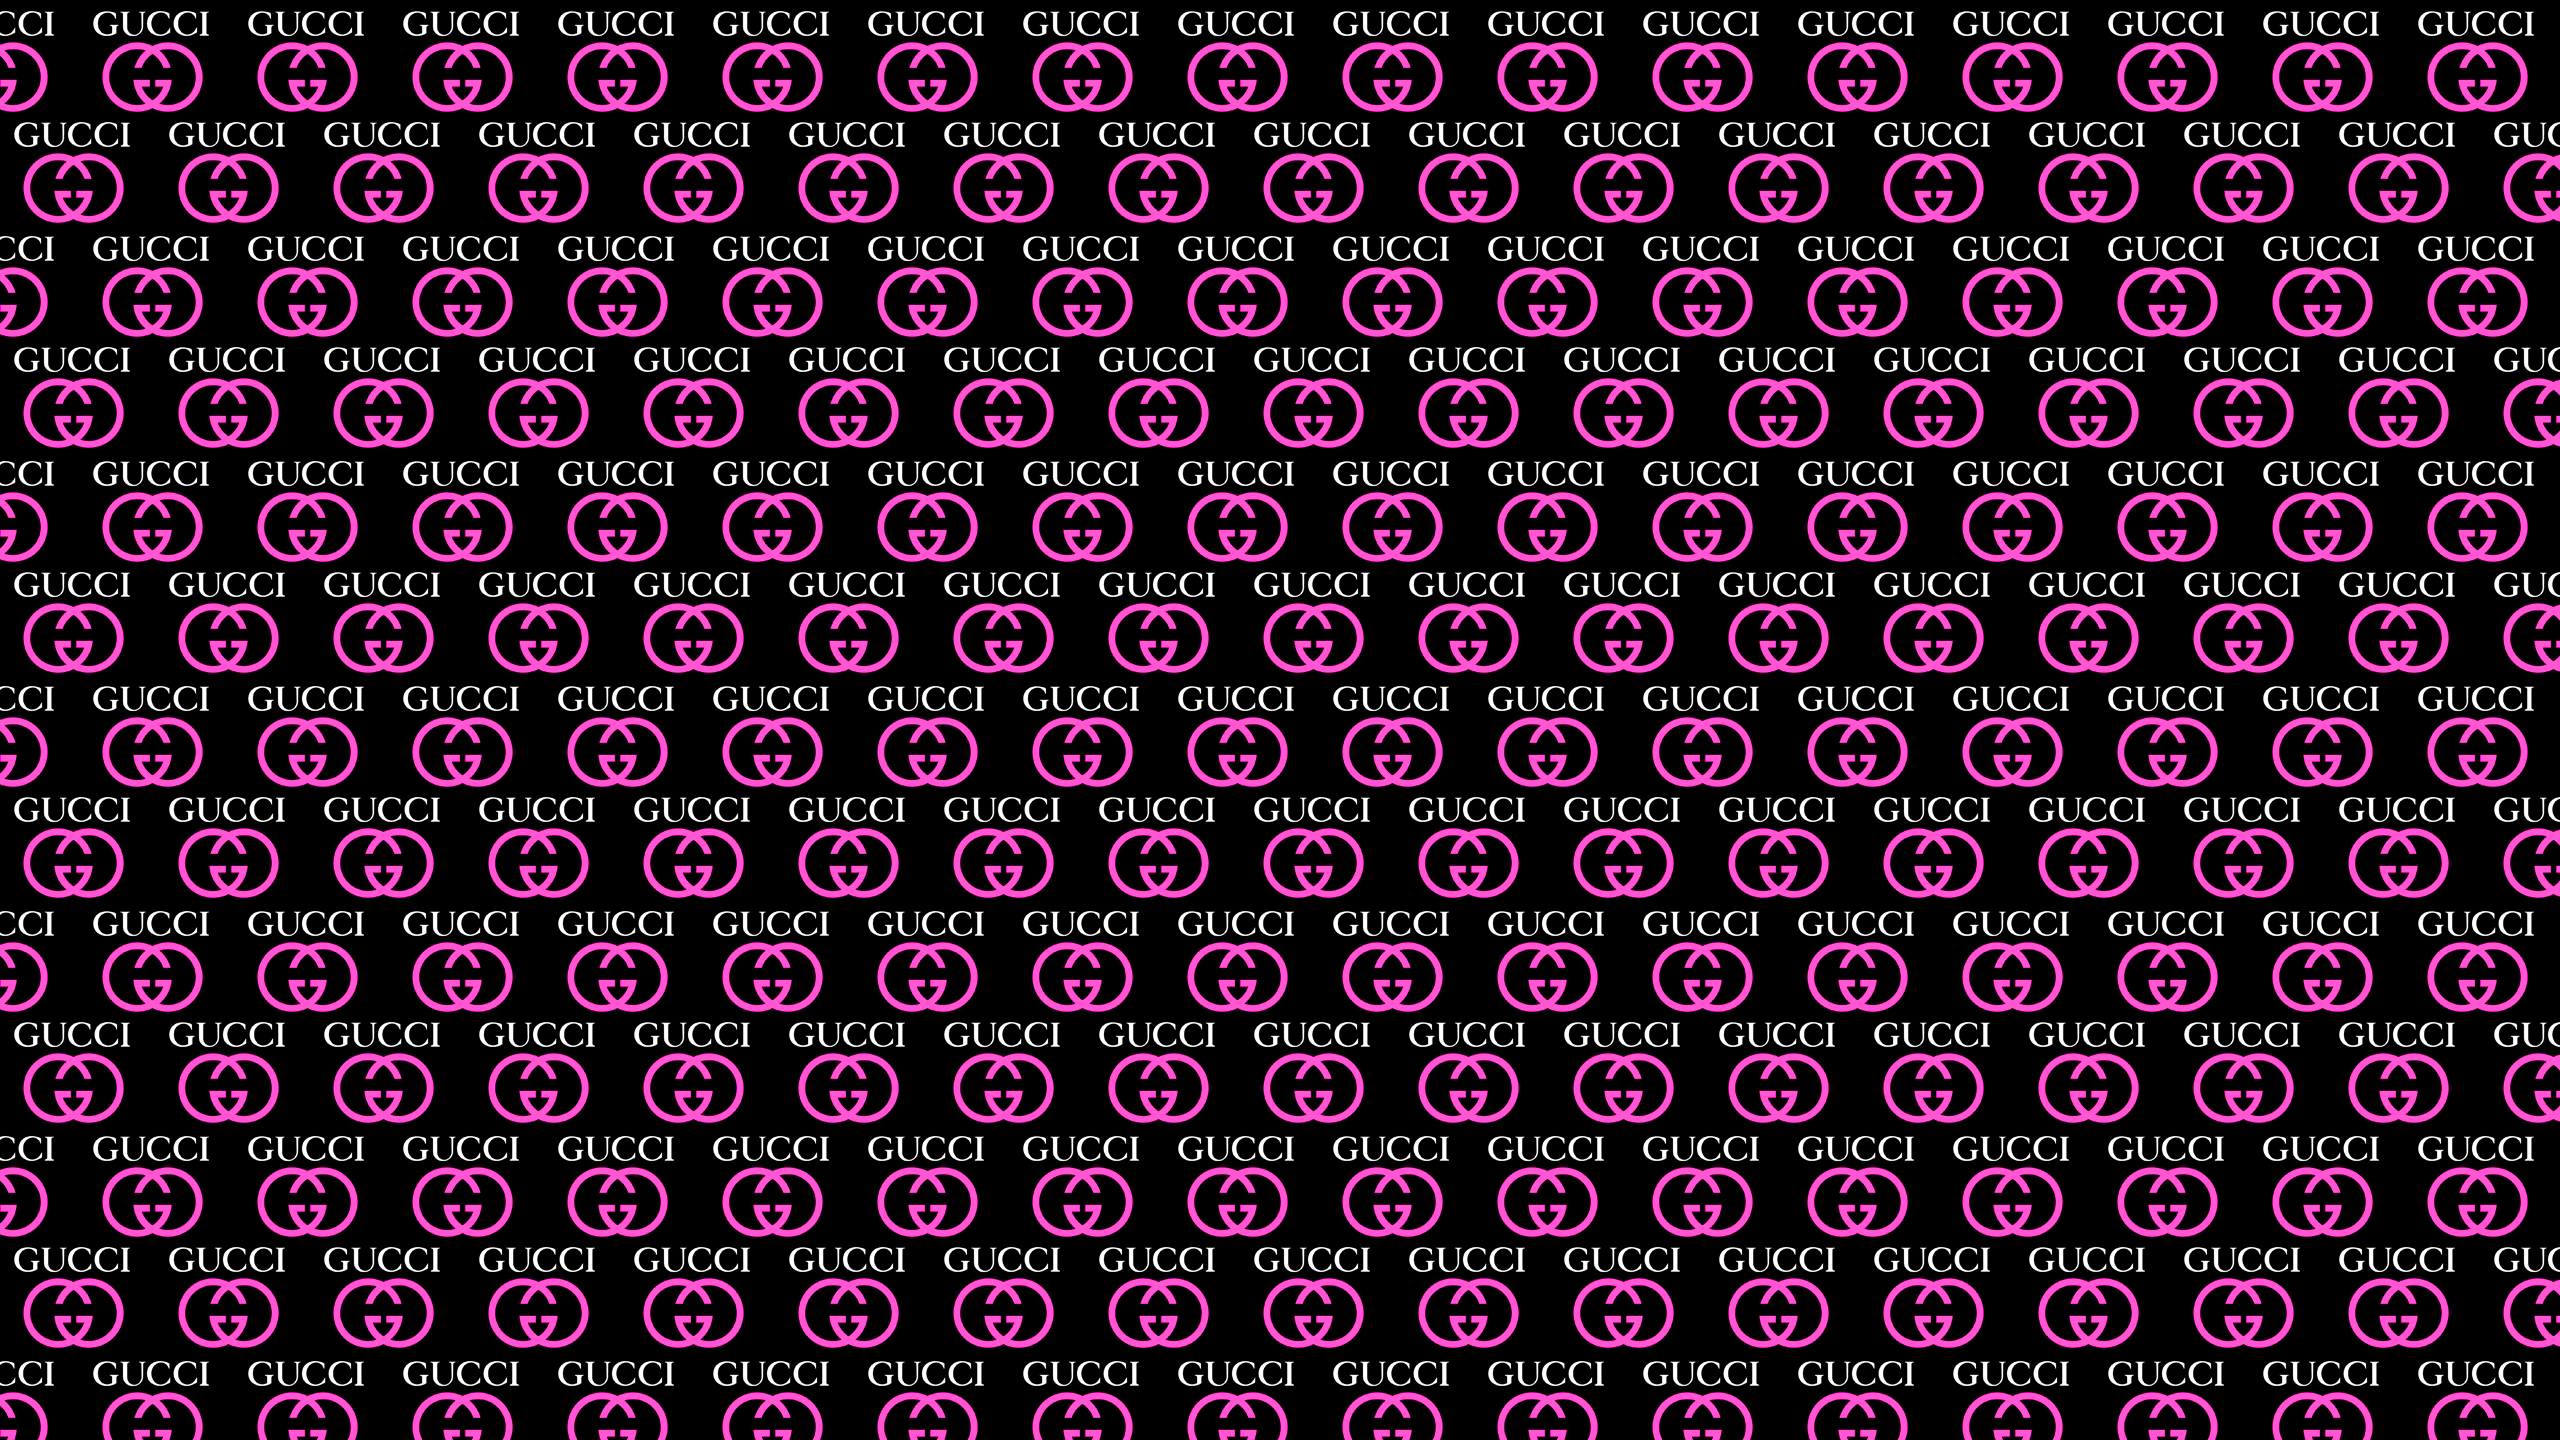 Pink Gucci Wallpapers Top Free Pink Gucci Backgrounds Wallpaperaccess